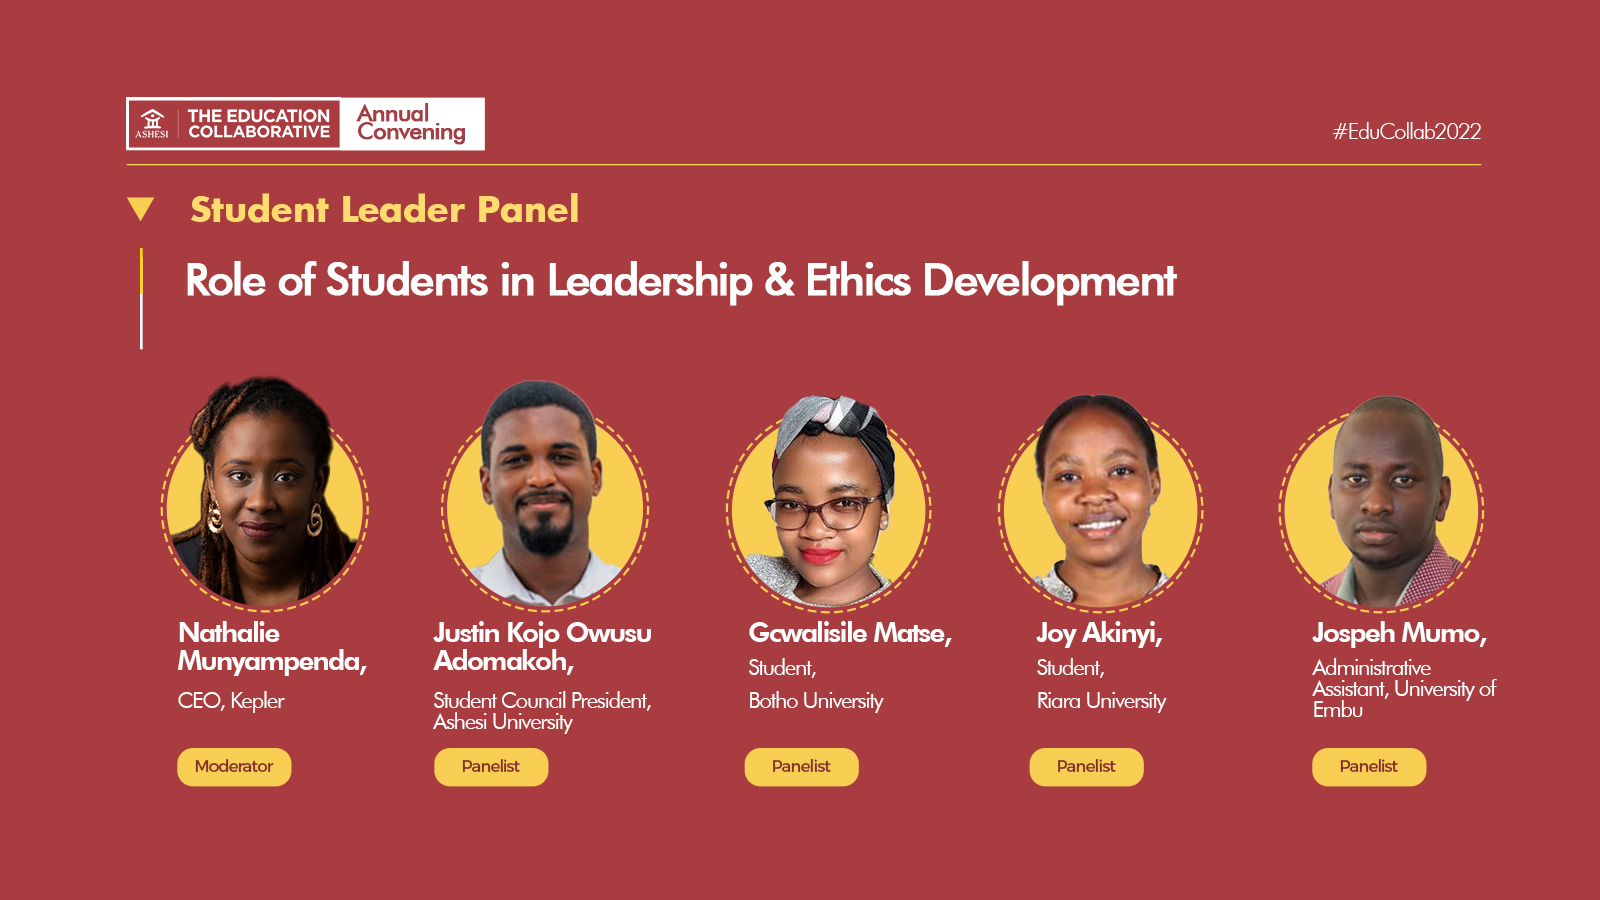 Student Leader Panel: Role of Students in Leadership & Ethics Development |  The Education Collaborative